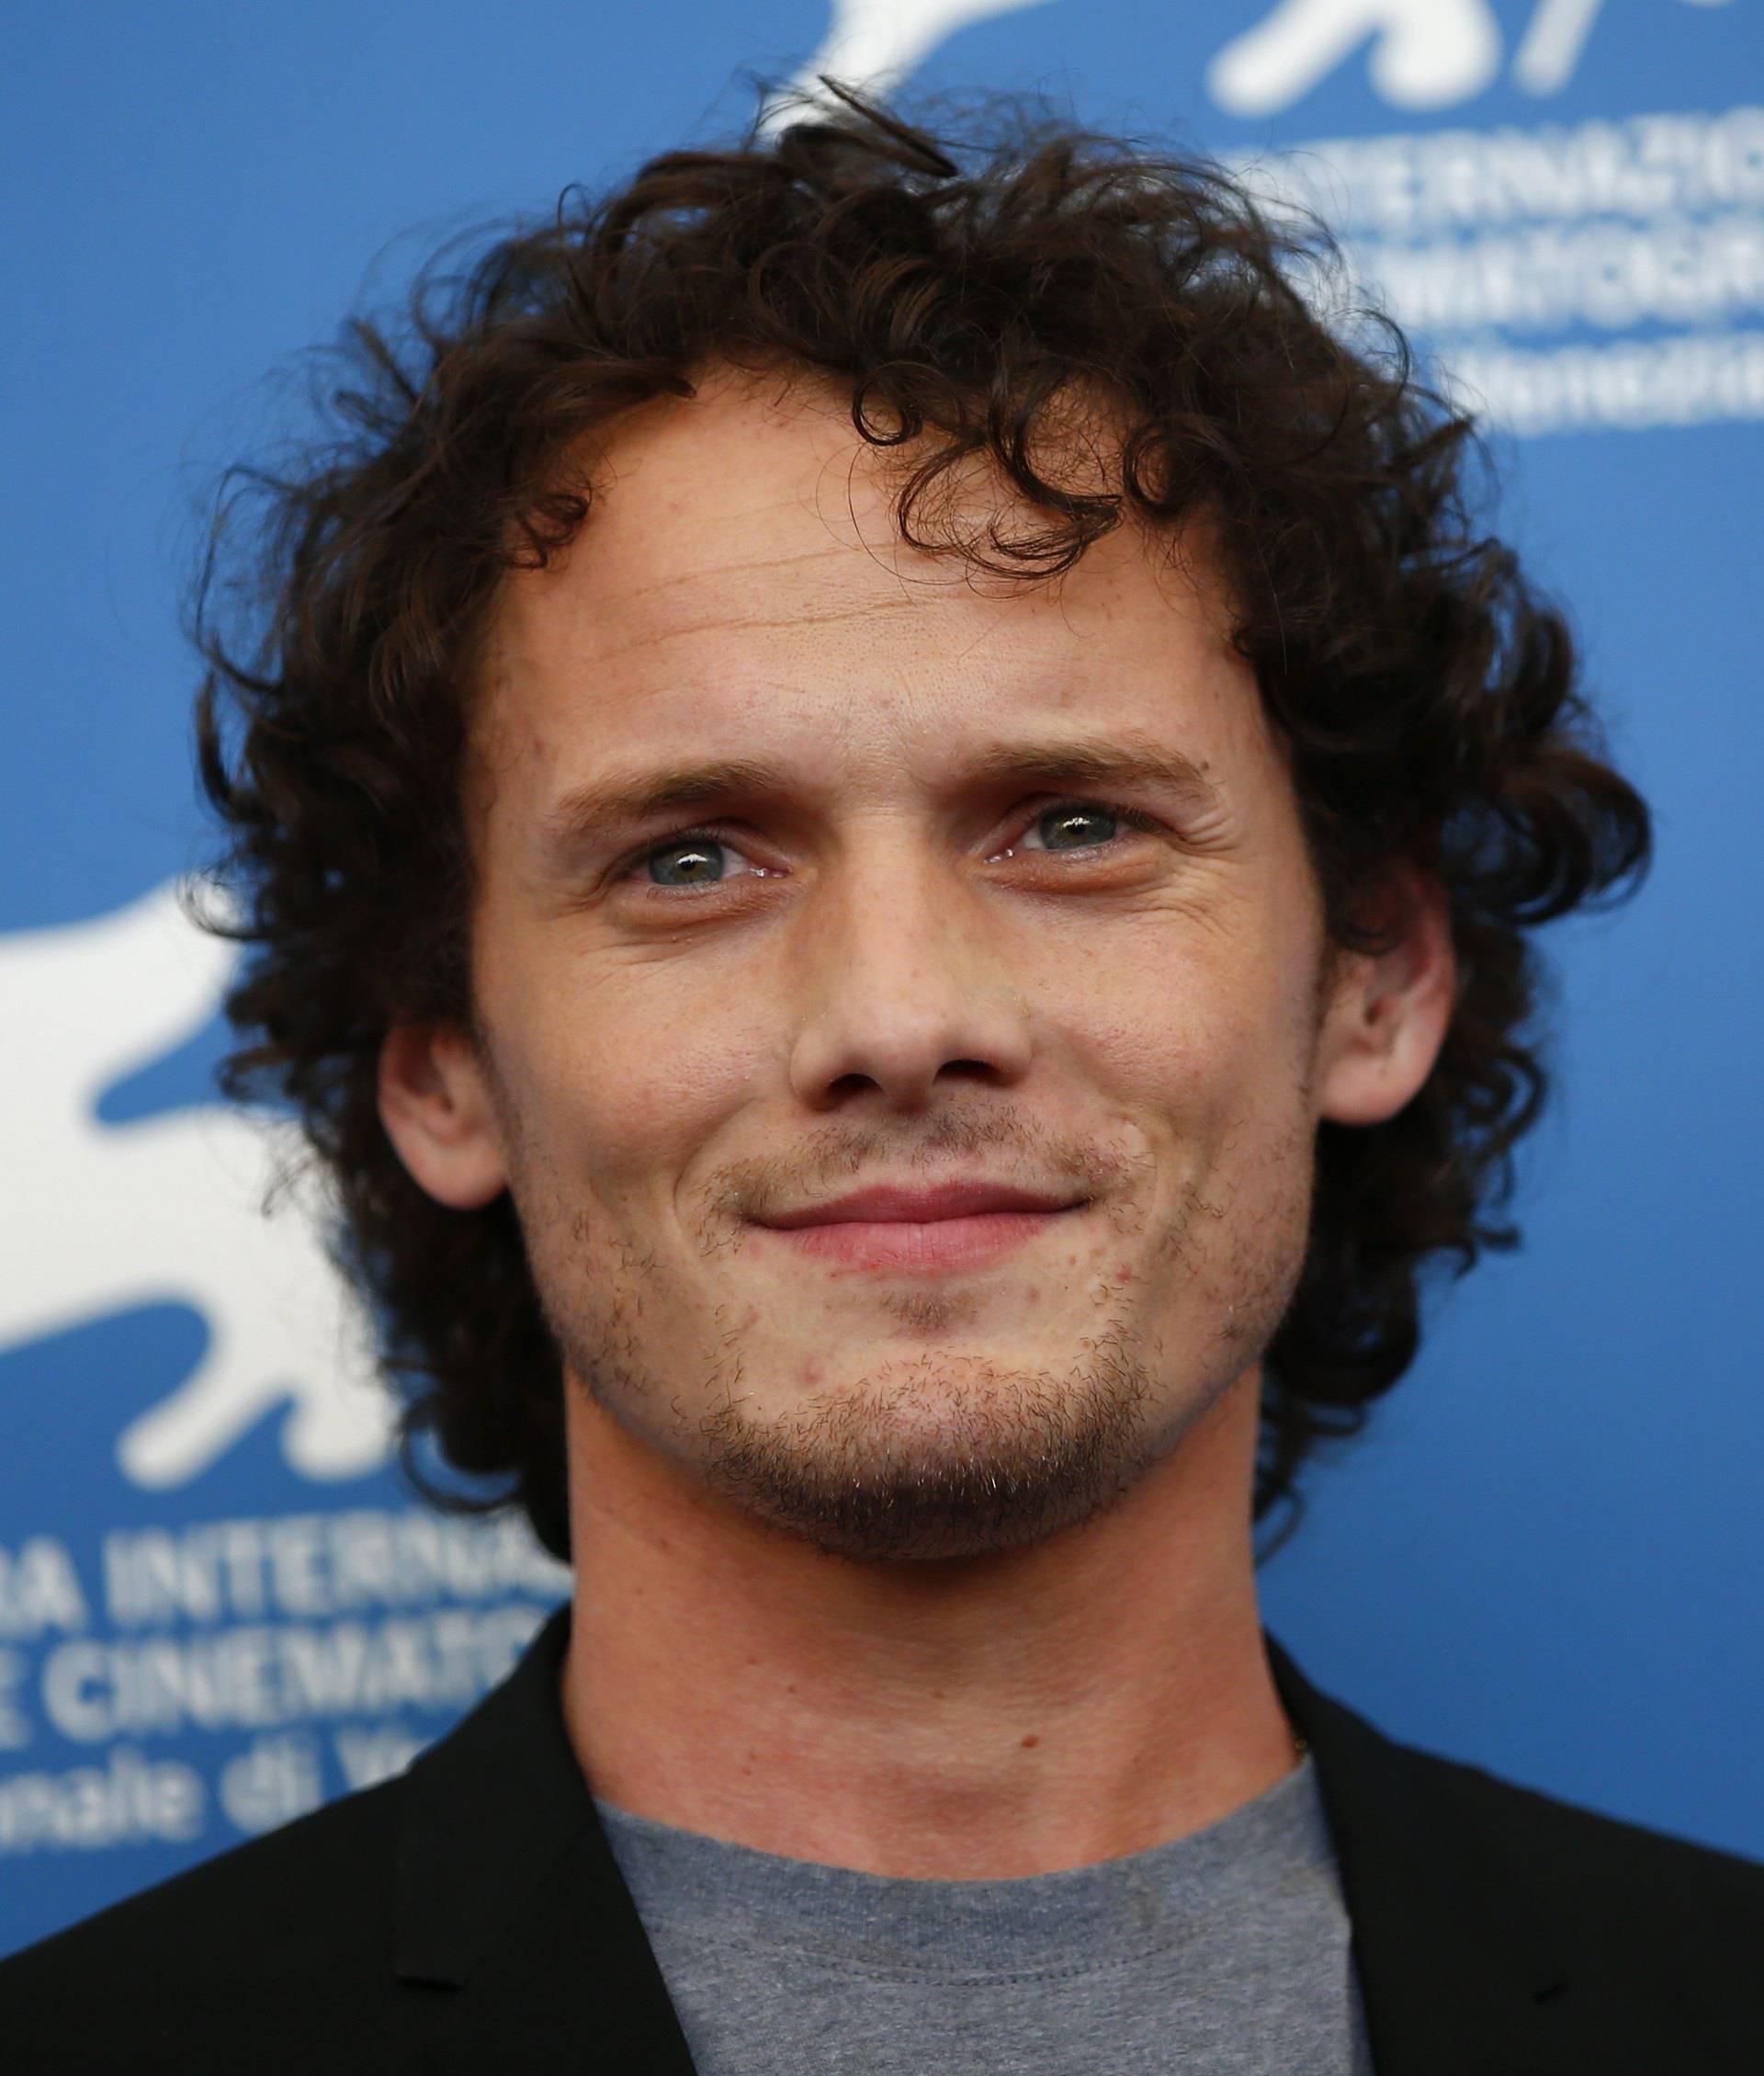 Cast member Yelchin poses during the photo call for the movie "Burying the ex" at the 71st Venice Film Festival